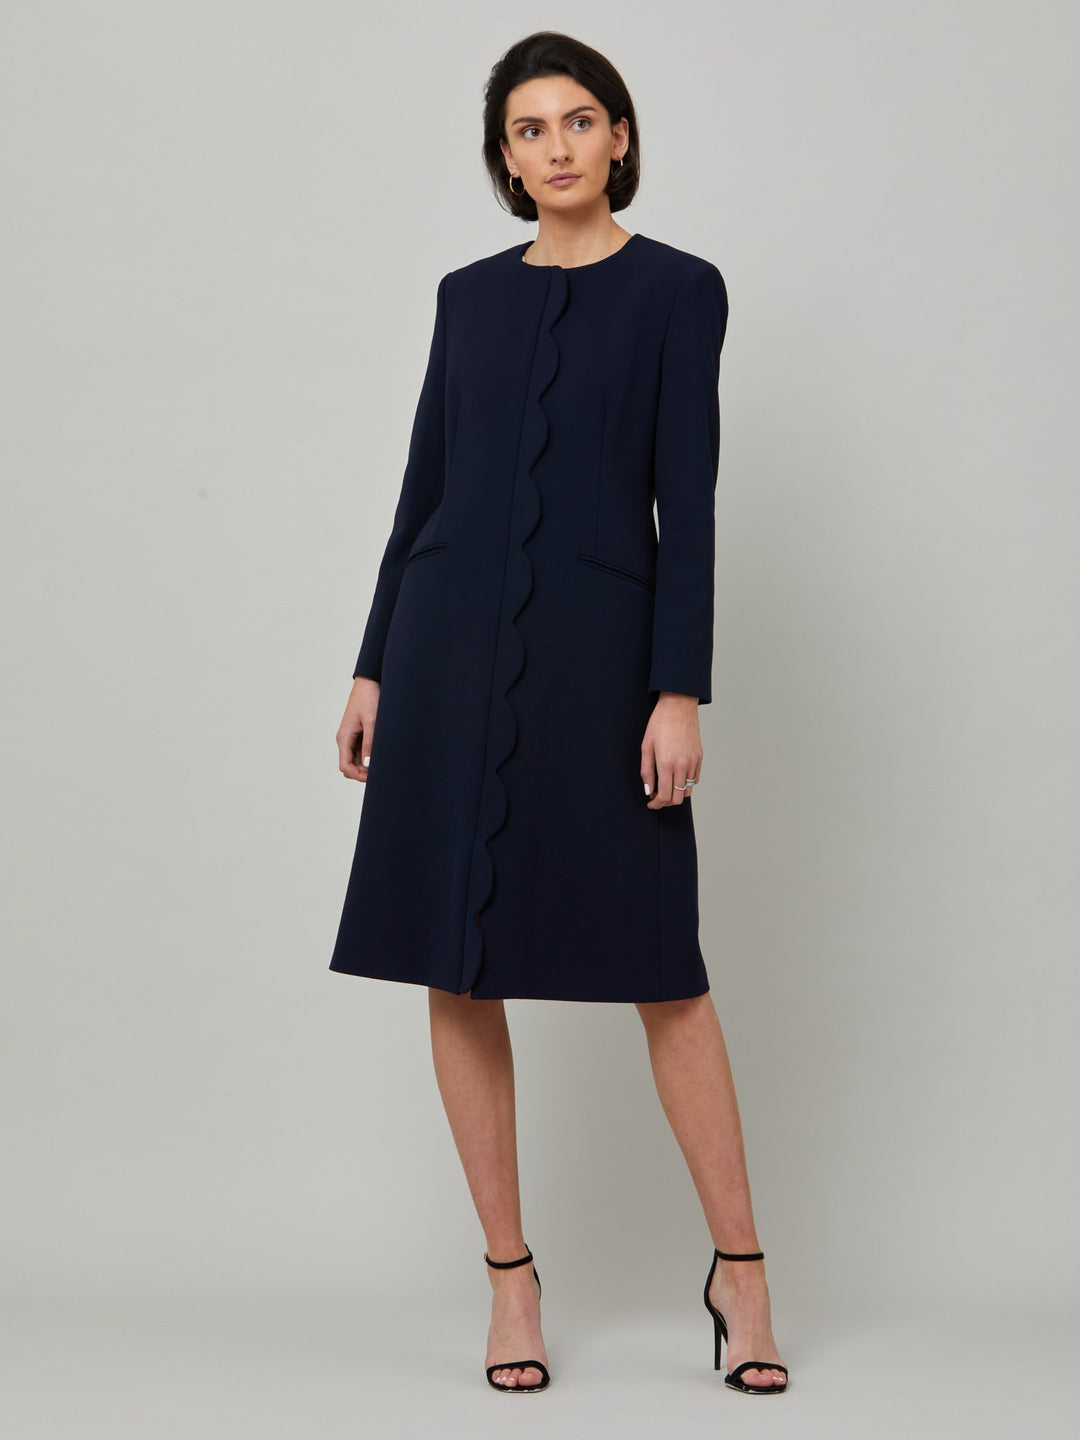 Meet Julia, the ultimate guest coat in classic navy. Body skimming silhouette, jewel neckline and elegant scallop front conceal a zip fastening. Think spring weddings or a day at the races.